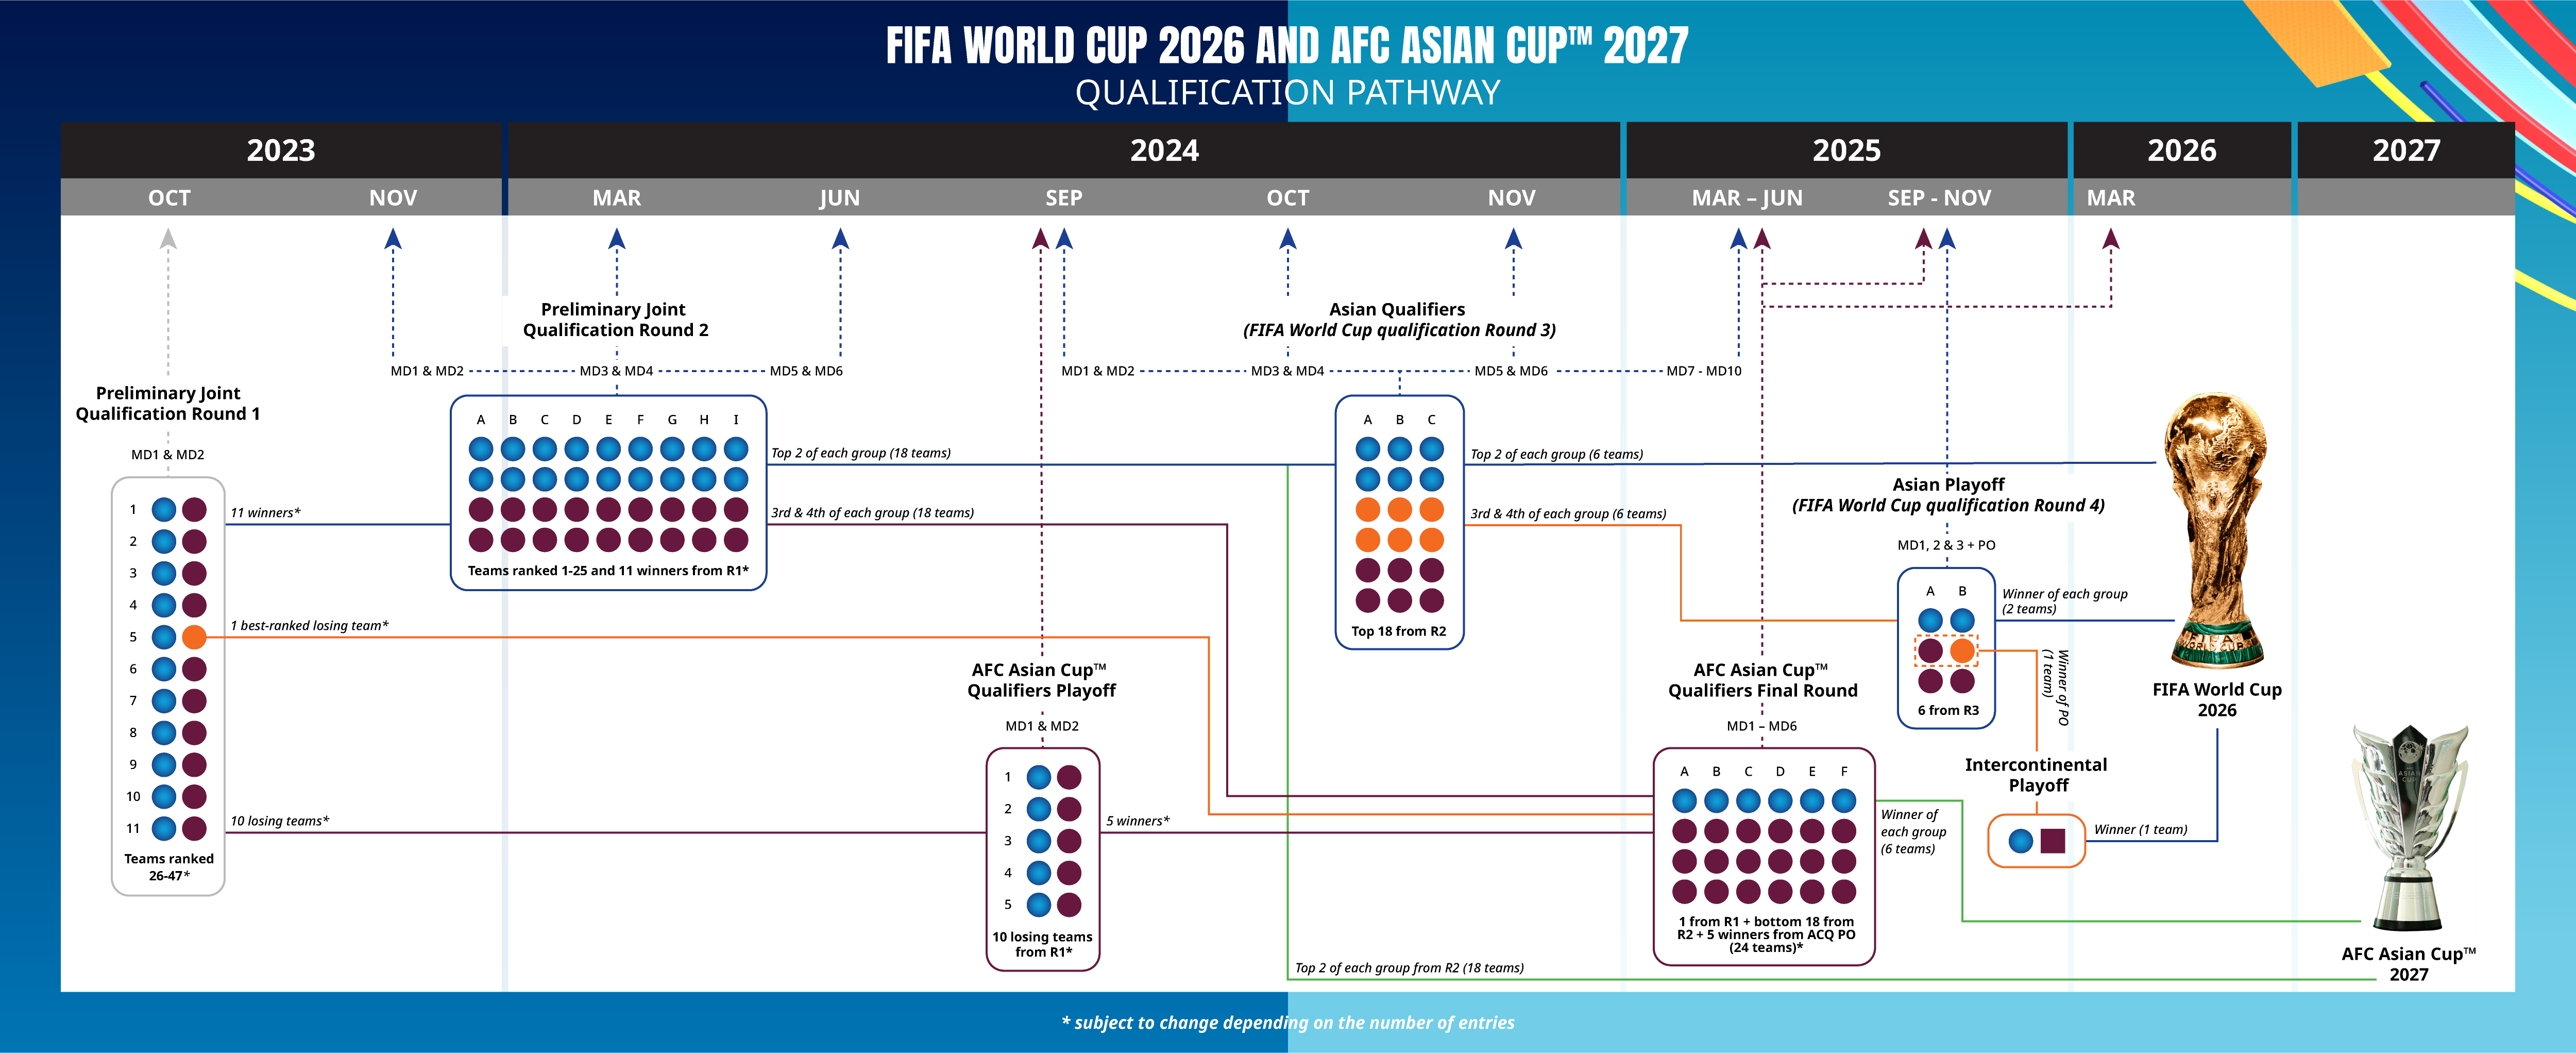 Asia’s pathway to the FIFA World Cup 2026 and AFC Asian Cup™ 2027 confirmed – Team Melli